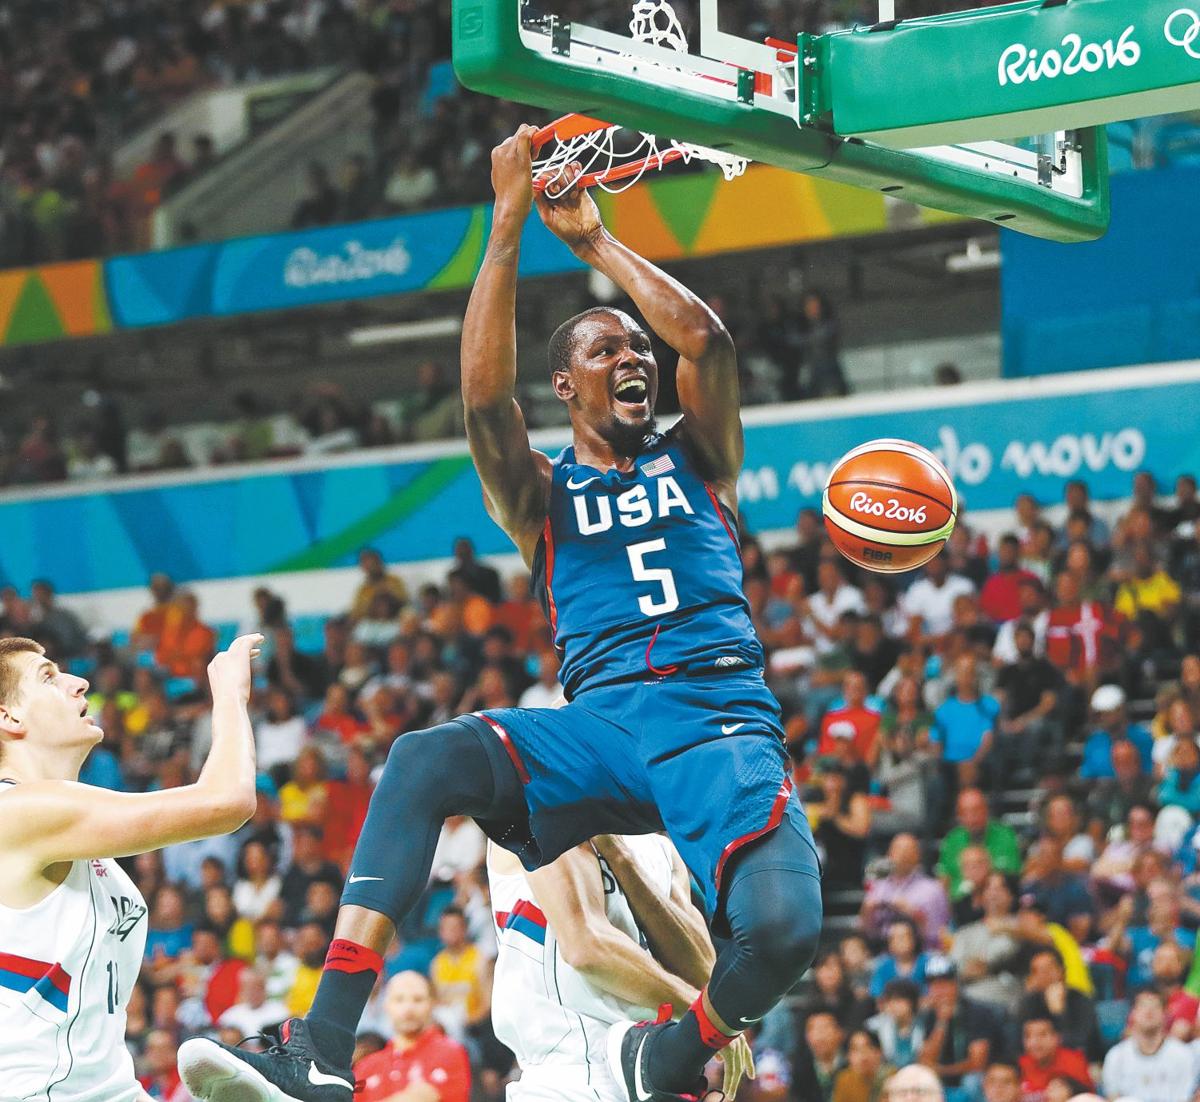 Durant finds his bliss as scorer, leading U.S. men to gold